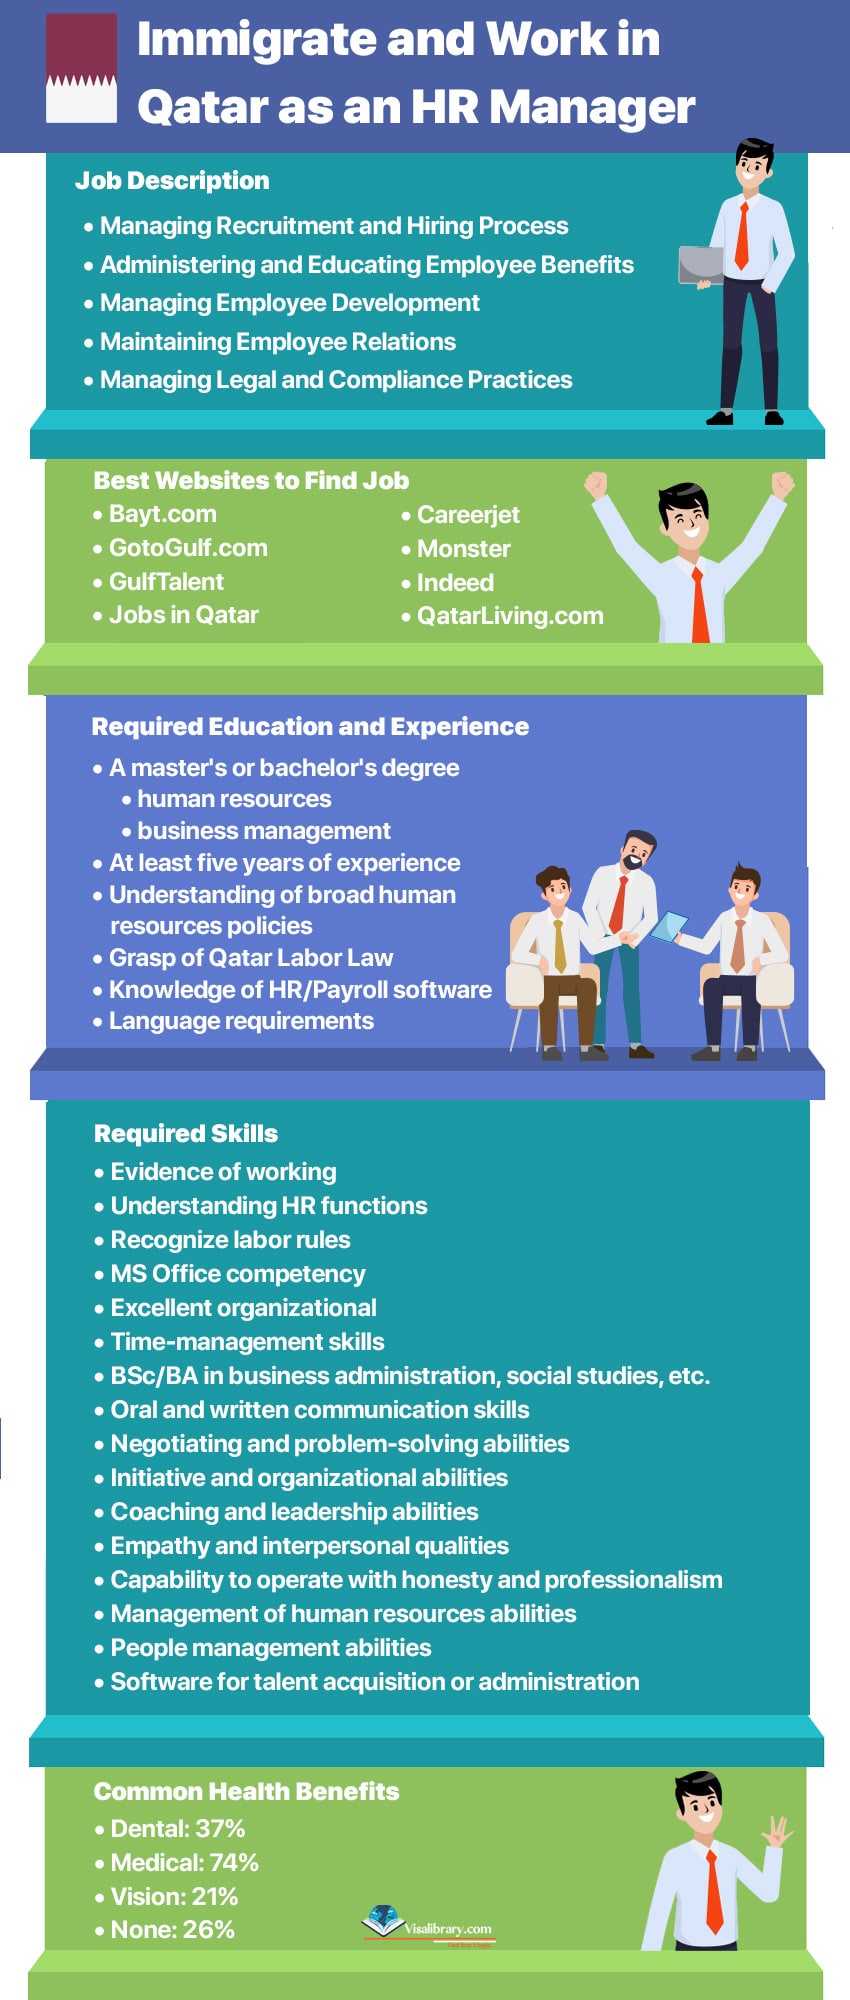 Infographic How to Immigrate and Work in Qatar as an HR Manager